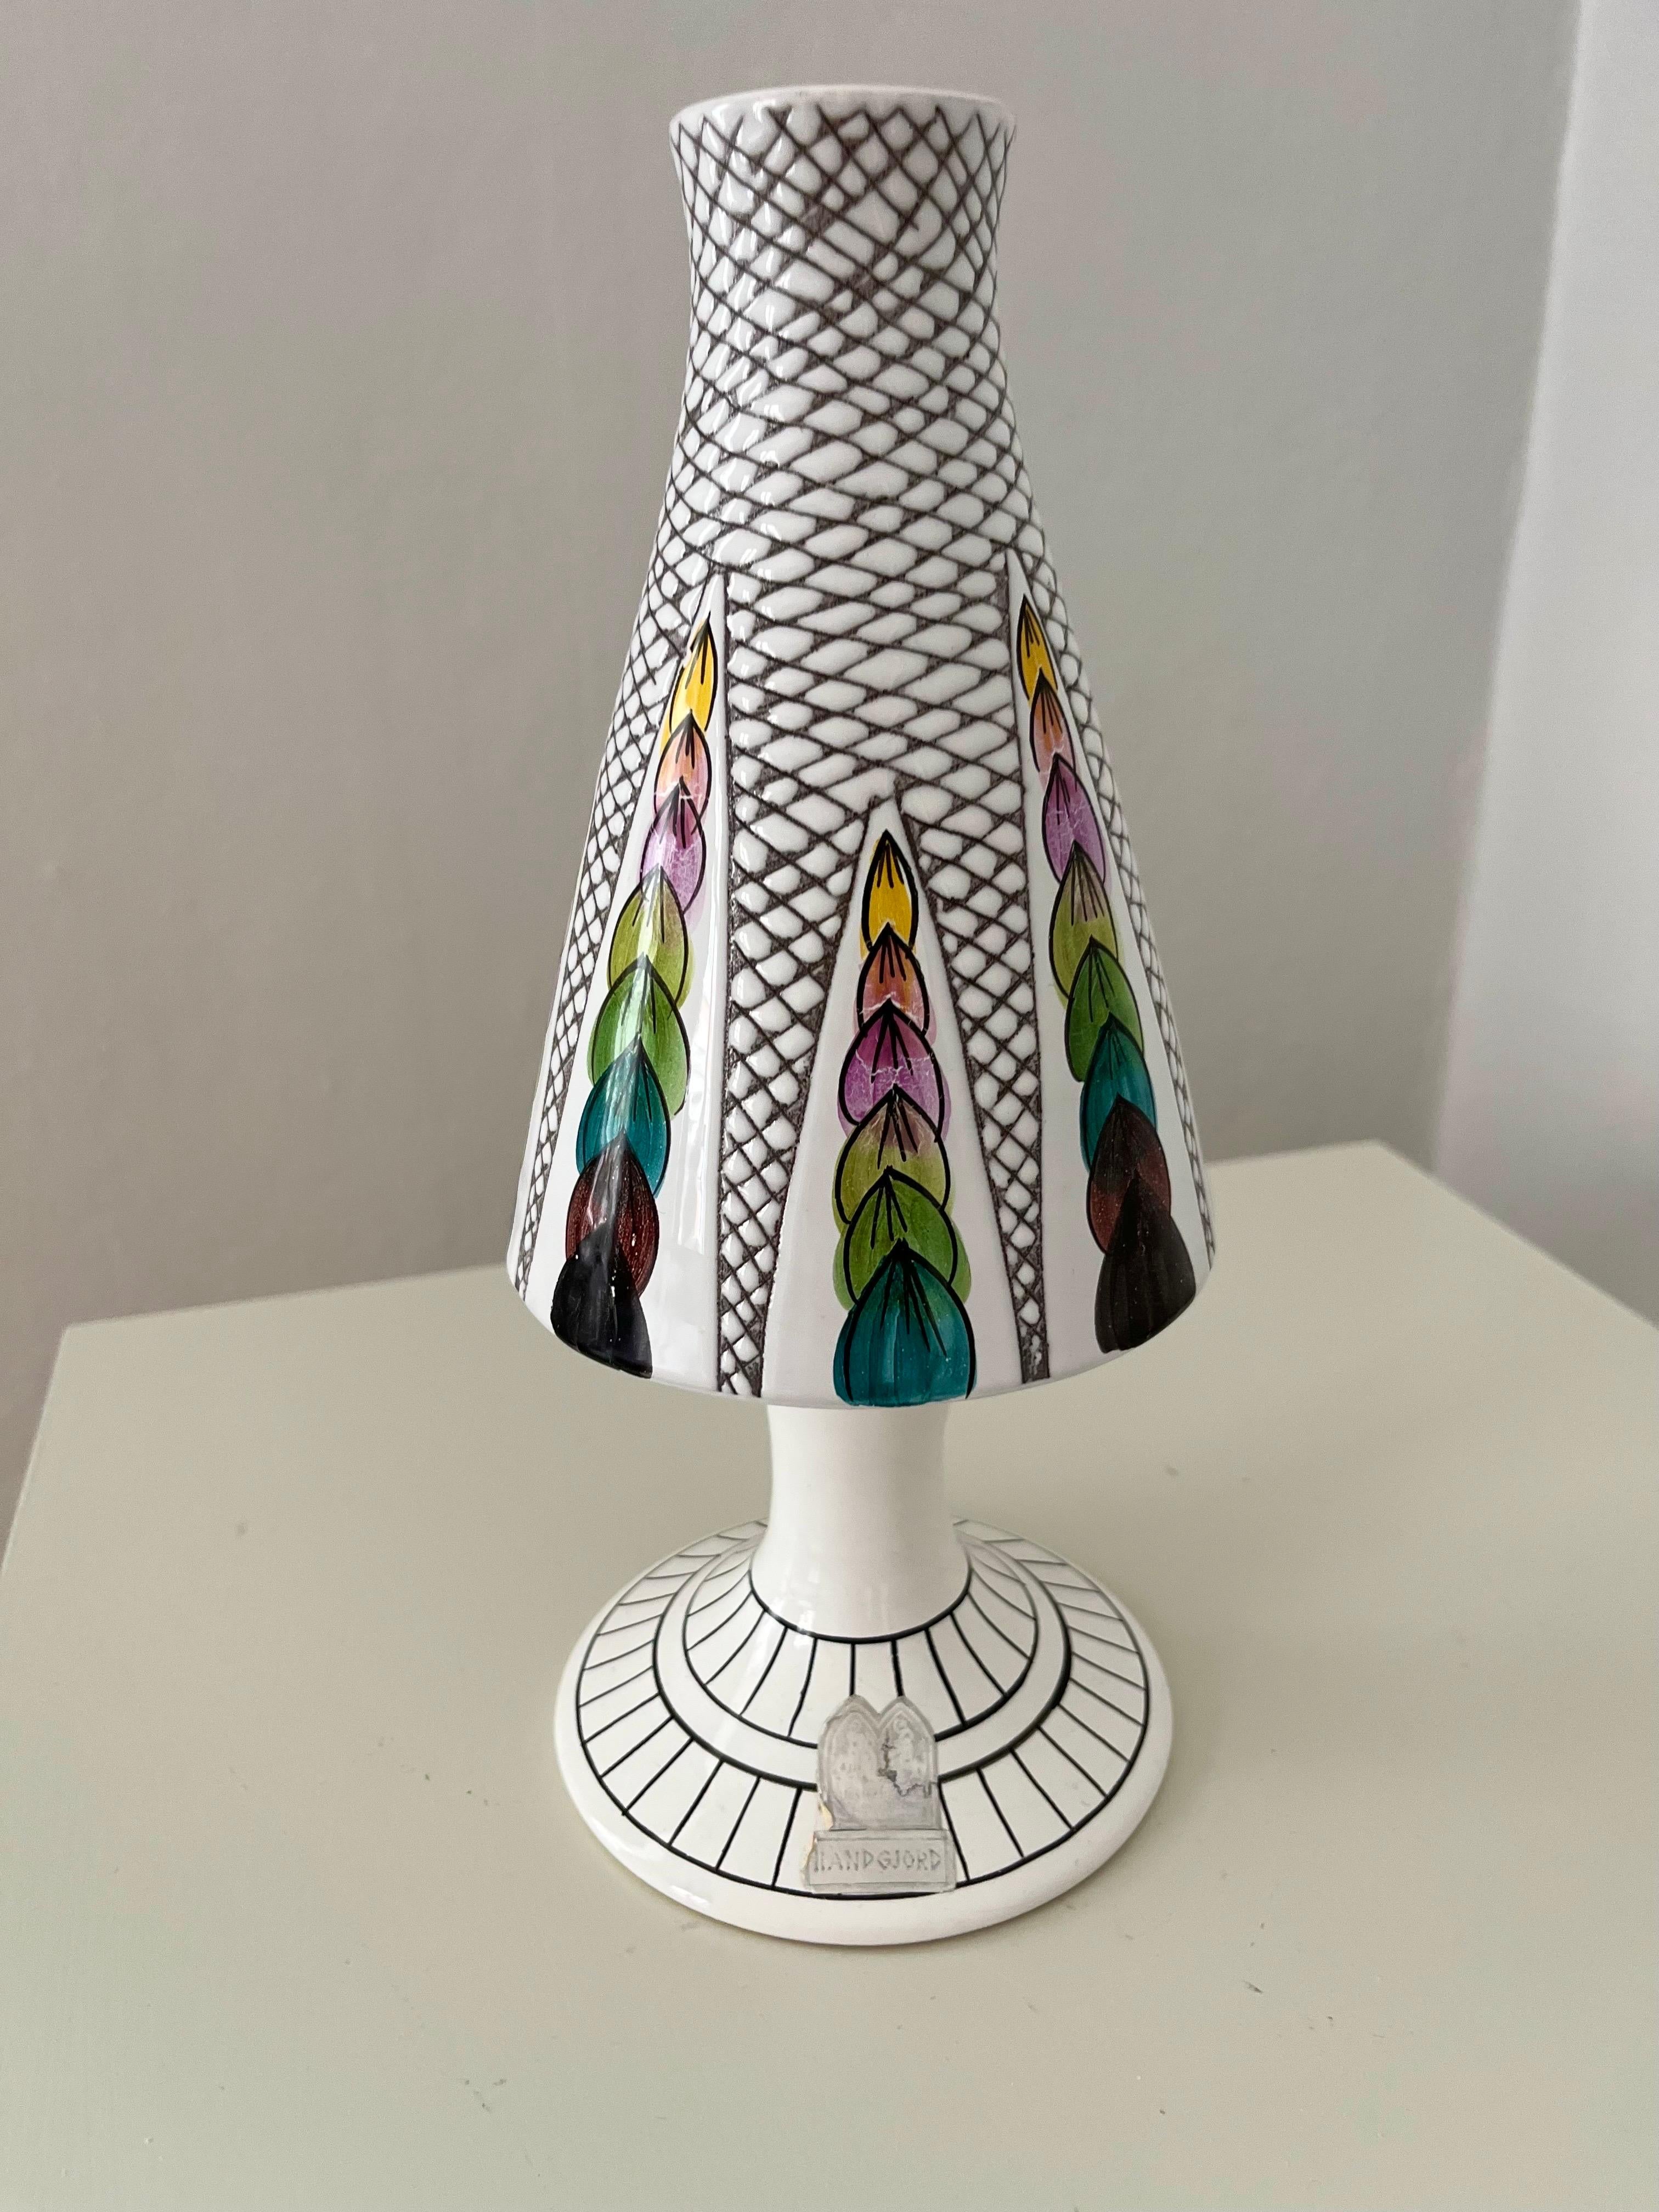 1960s Kloster Keramik Ystad Swedish Handcrafted Ceramic Vase

Elevate your decor with this handcrafted ceramic vase from Kloster Keramik Ystad, crafted in Sweden during the 1960s. Adorned with striking graphic patterns, this vase features a base of